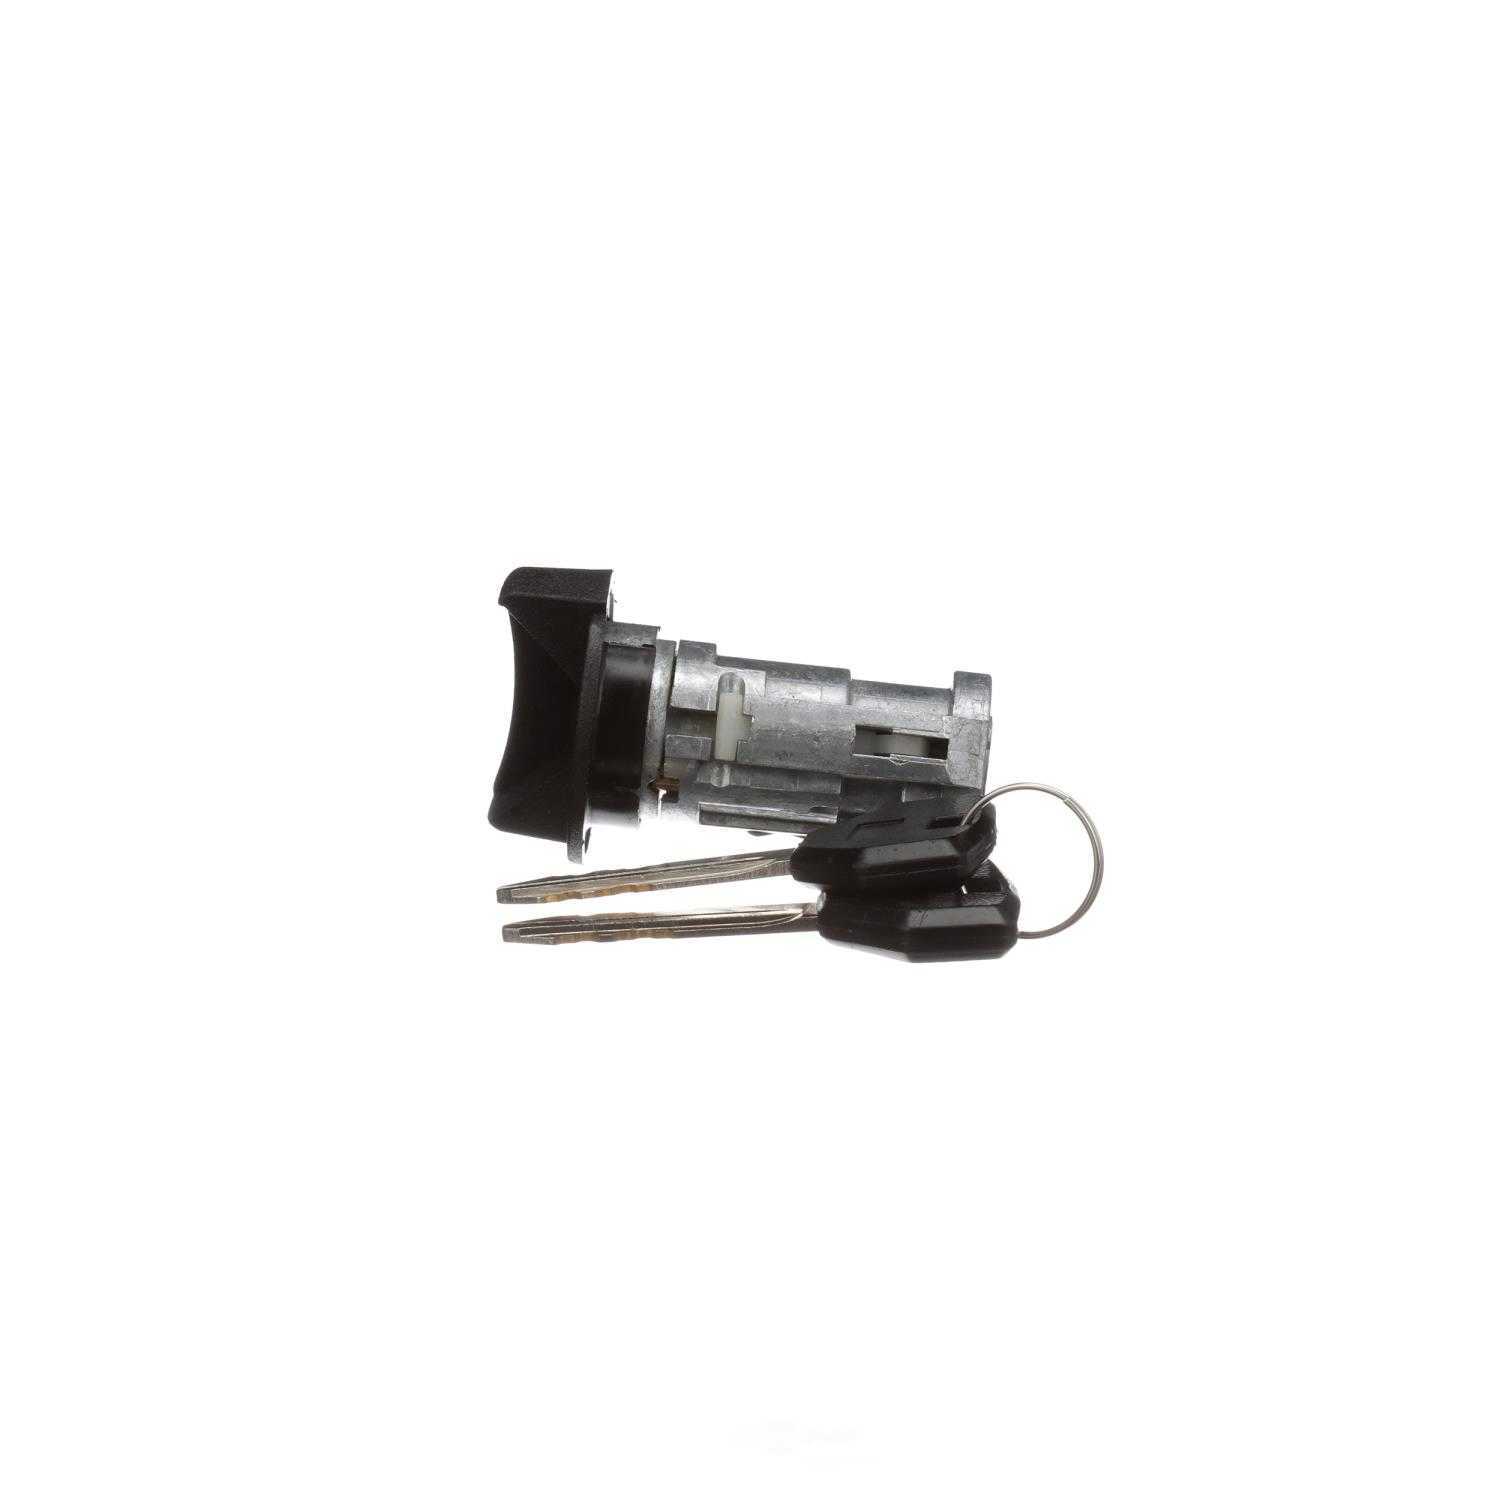 STANDARD MOTOR PRODUCTS - Ignition Lock Cylinder - STA US-211L